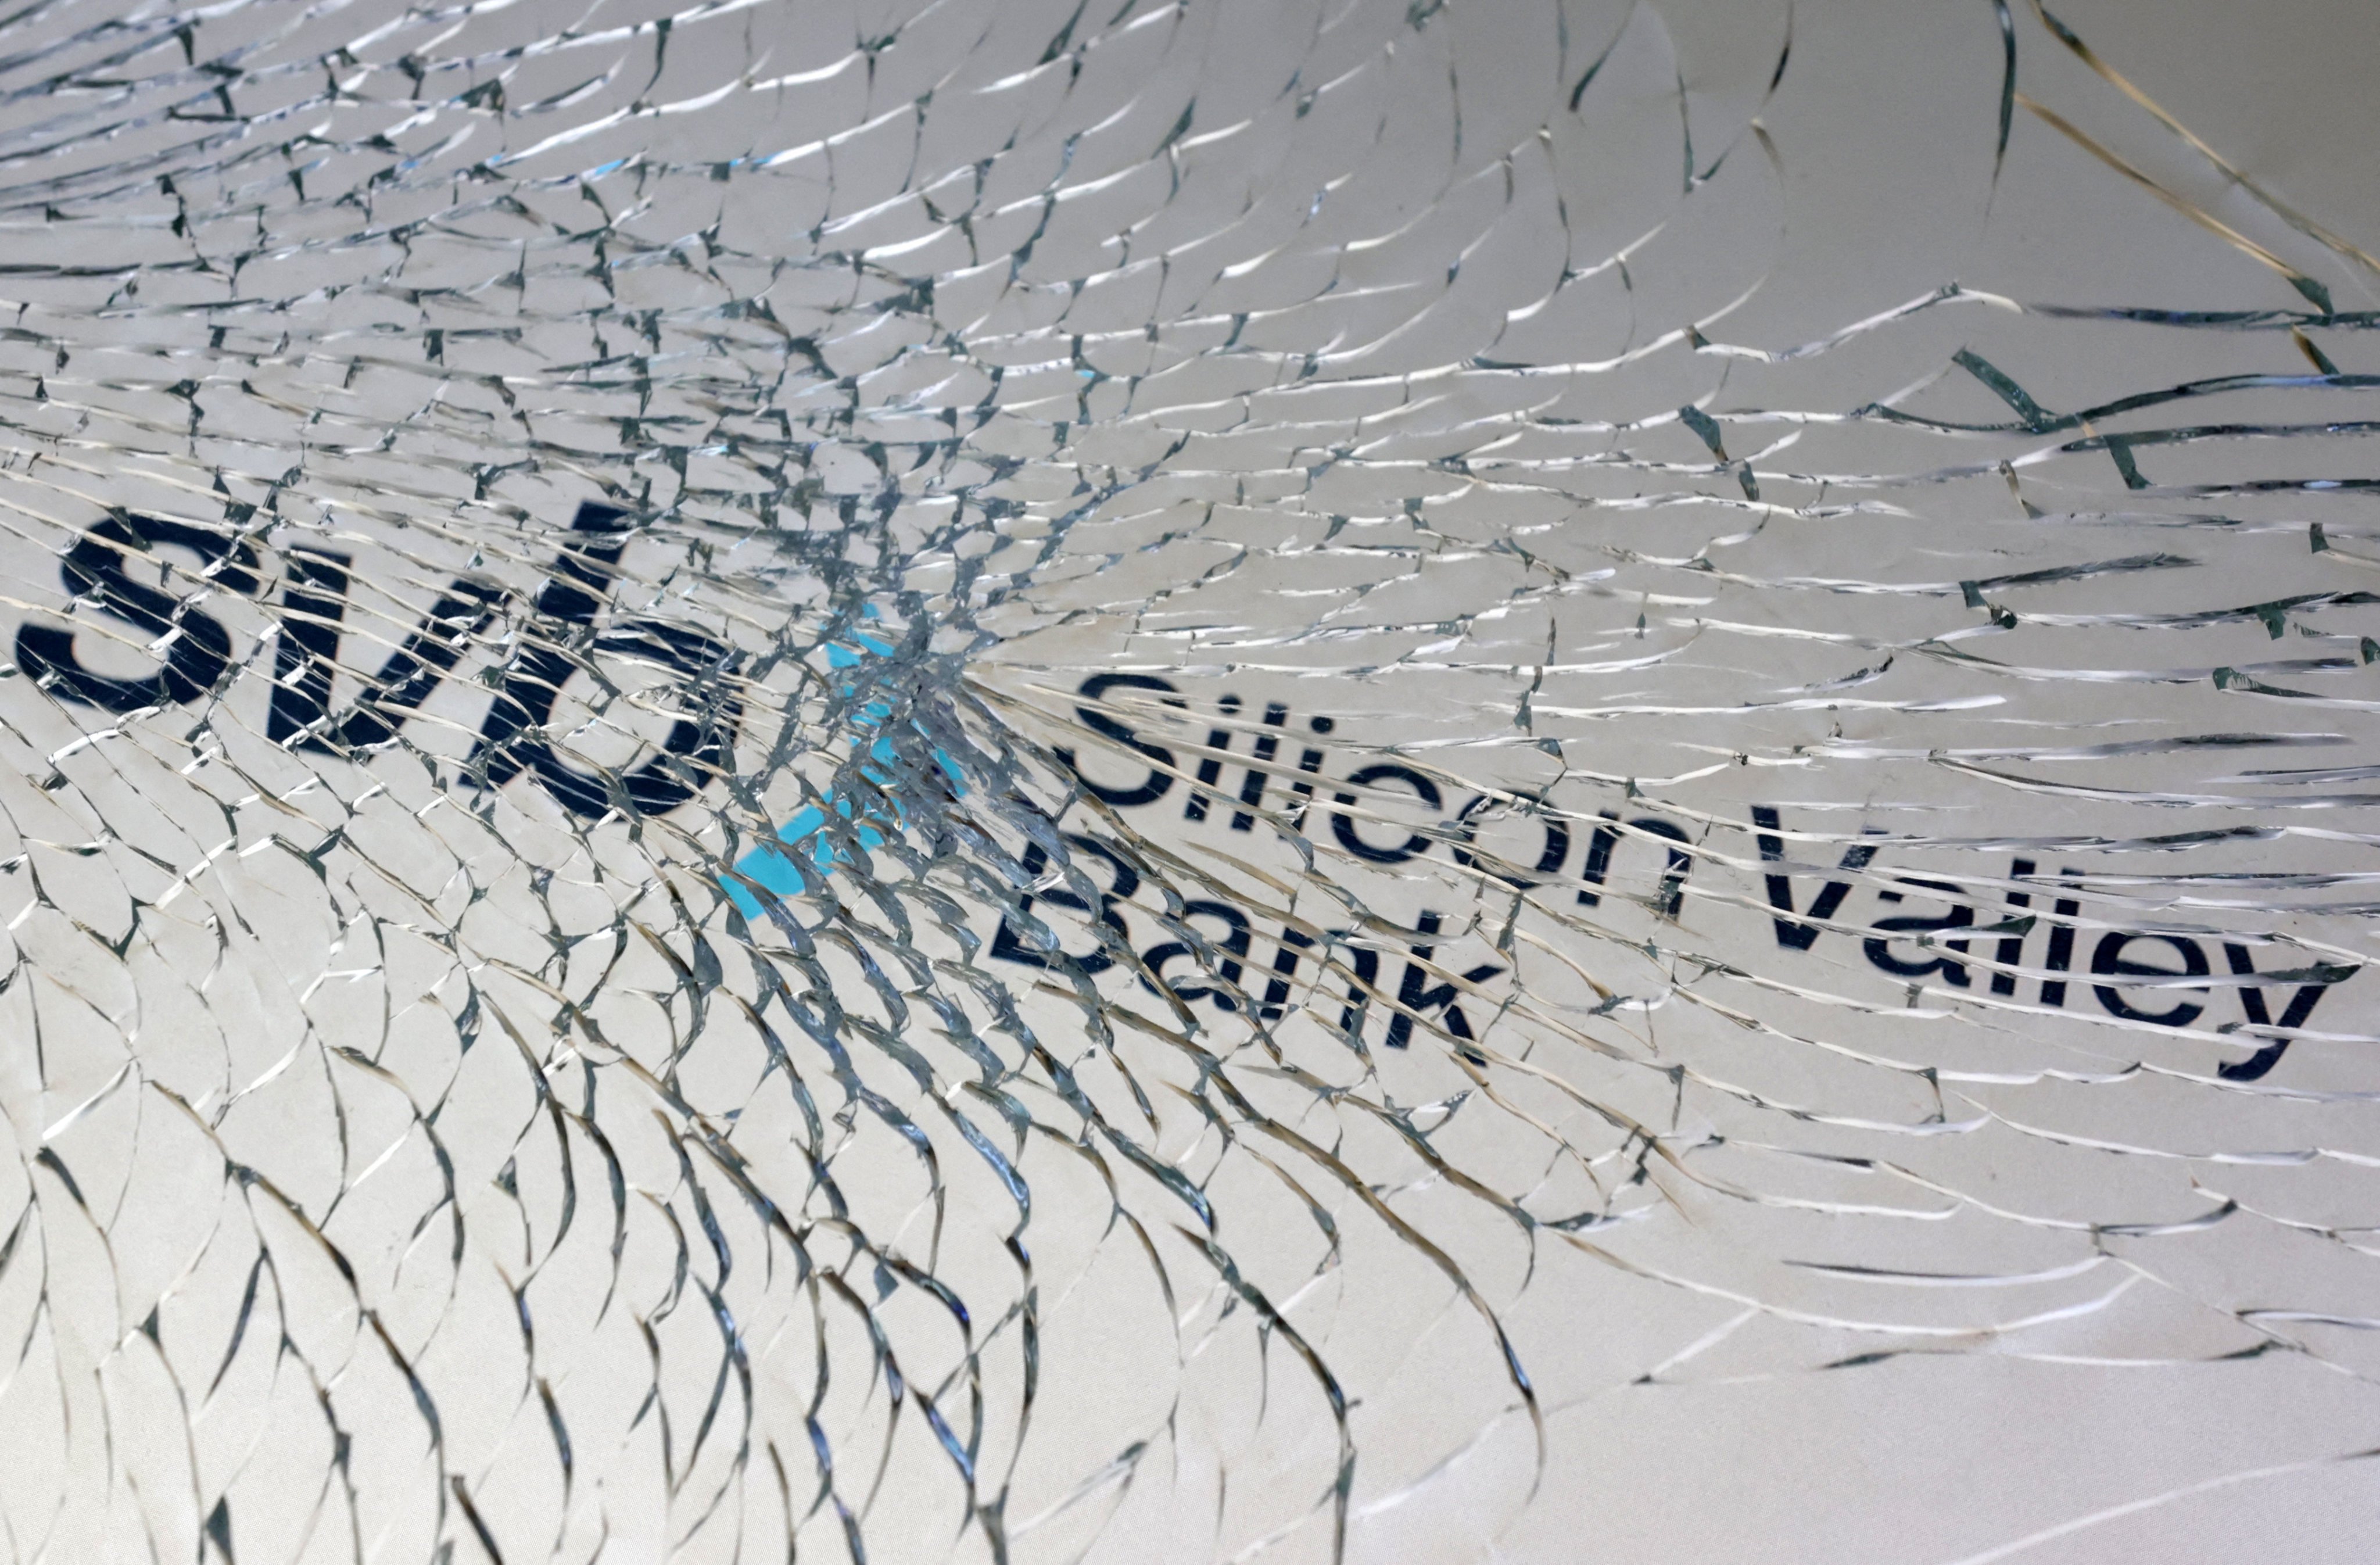 FILE PHOTO: SVB (Silicon Valley Bank) logo is seen through broken glass in this illustration taken March 10, 2023. REUTERS/Dado Ruvic/Illustration/File Photo